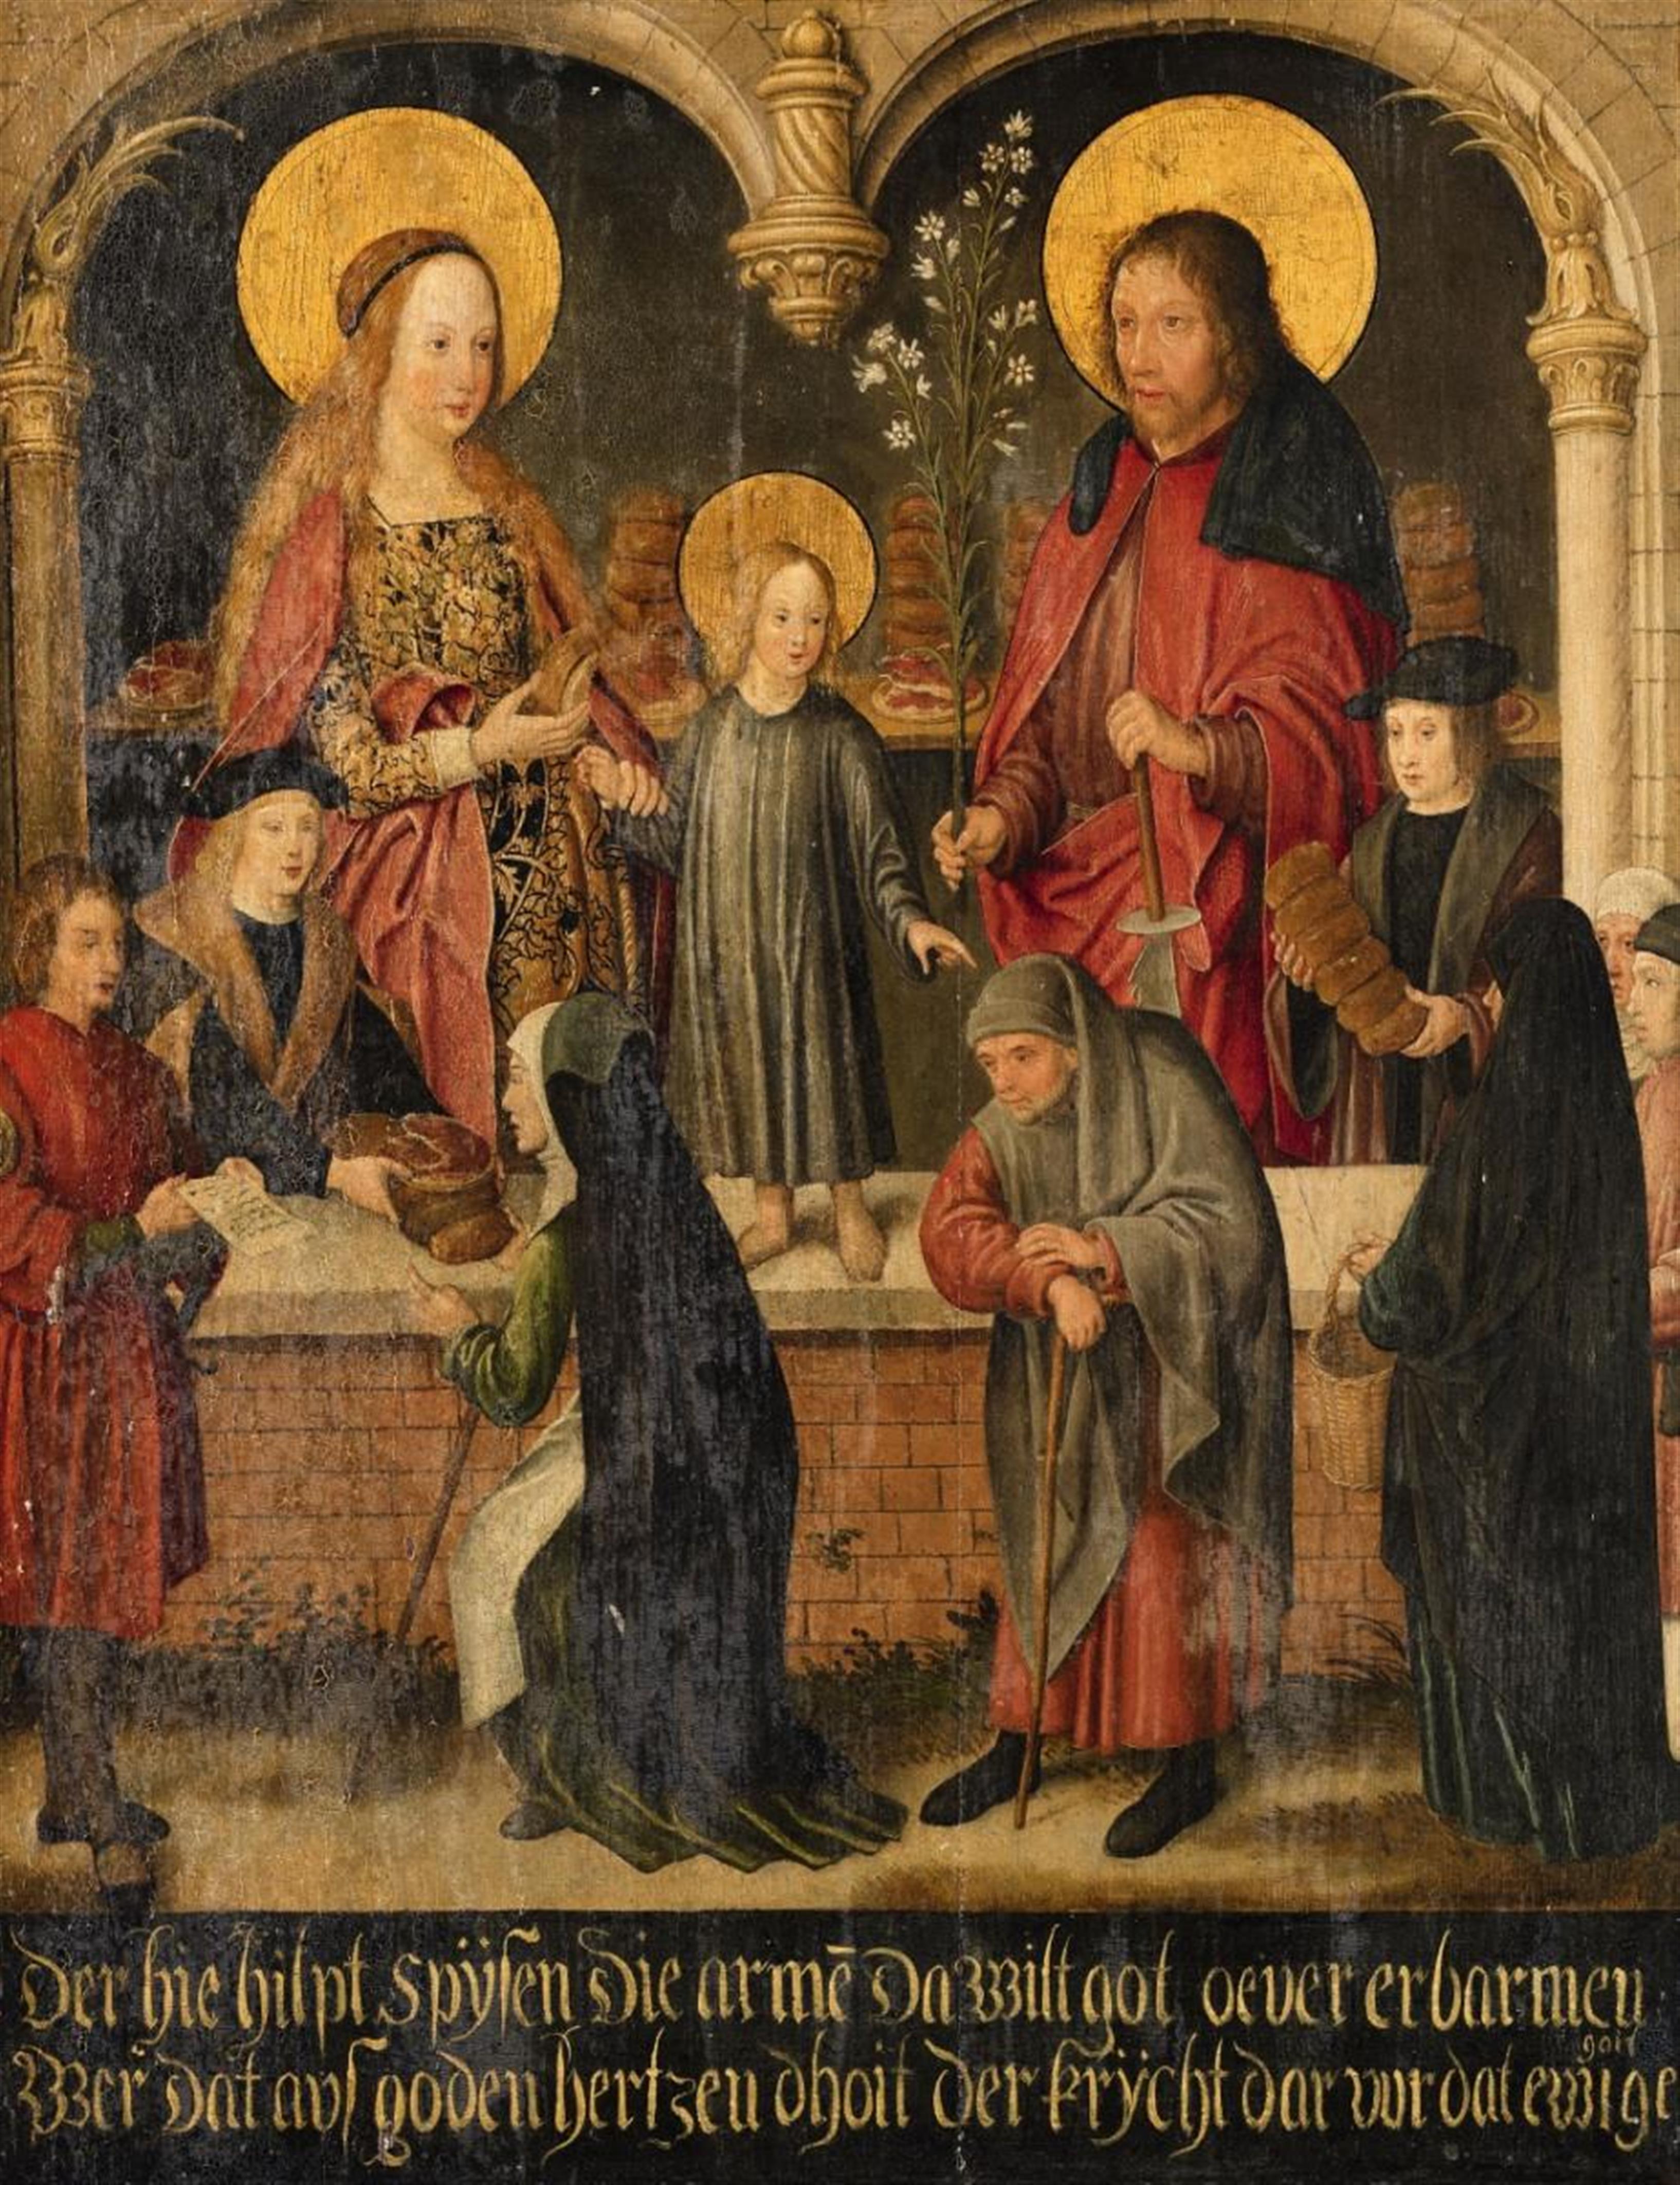 Niederdeutscher Meister circa 1520 - The Feeding of the Hungry with the Holy Family - image-1